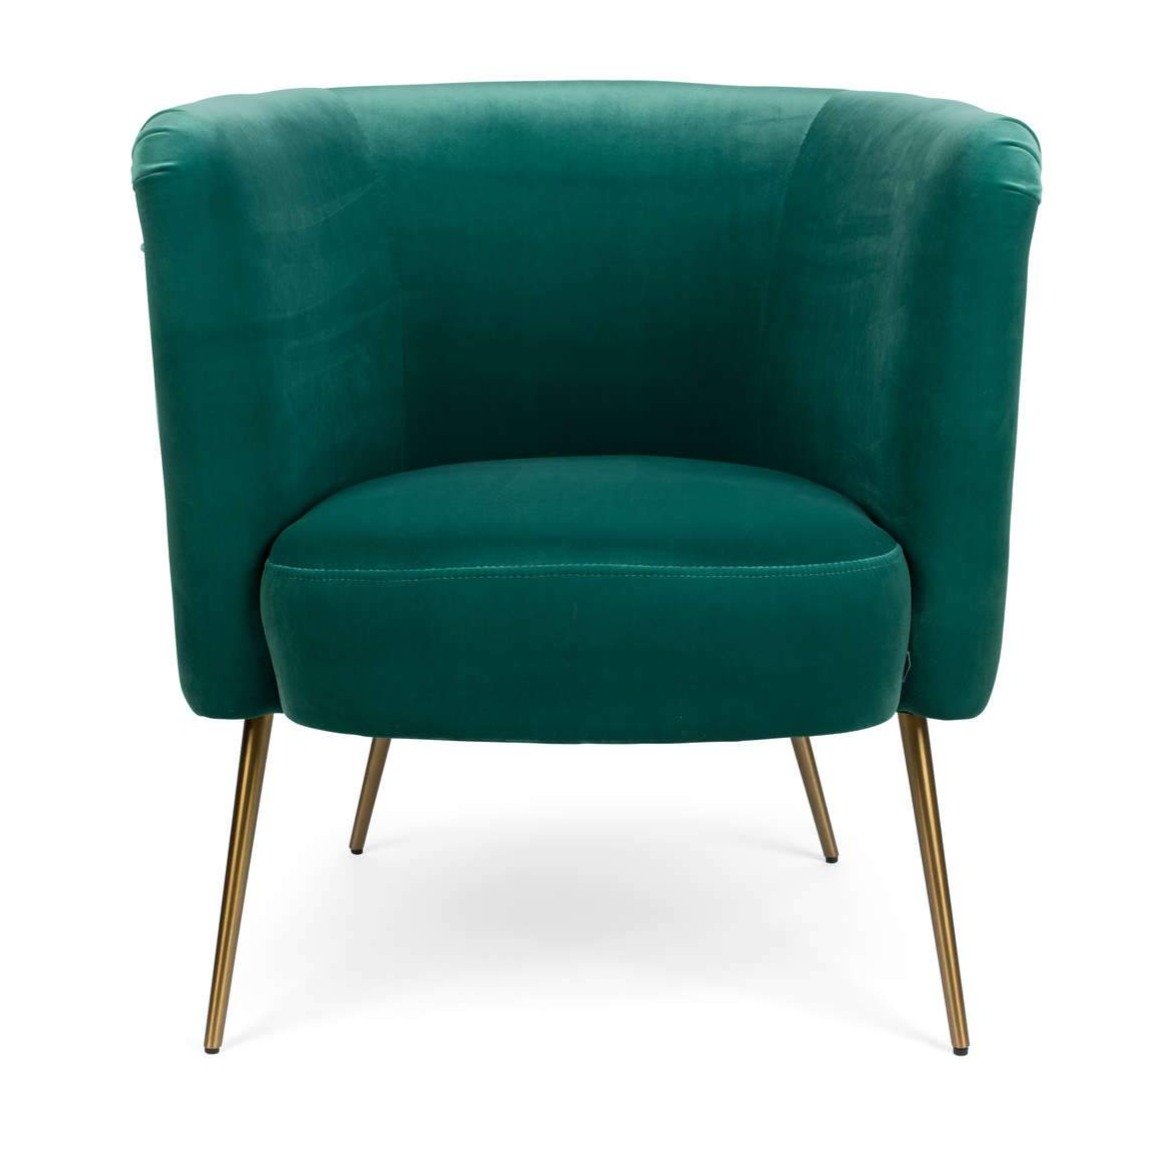 The Bold Monkey Such and Stud armchair is made of luxurious, velvet upholstery and matte, brass legs. The retro style with buttons is contrasted with modern rounded lines, which results in a real armchair for any room. But the real MVP of this velvet chair is its golden border with studs.